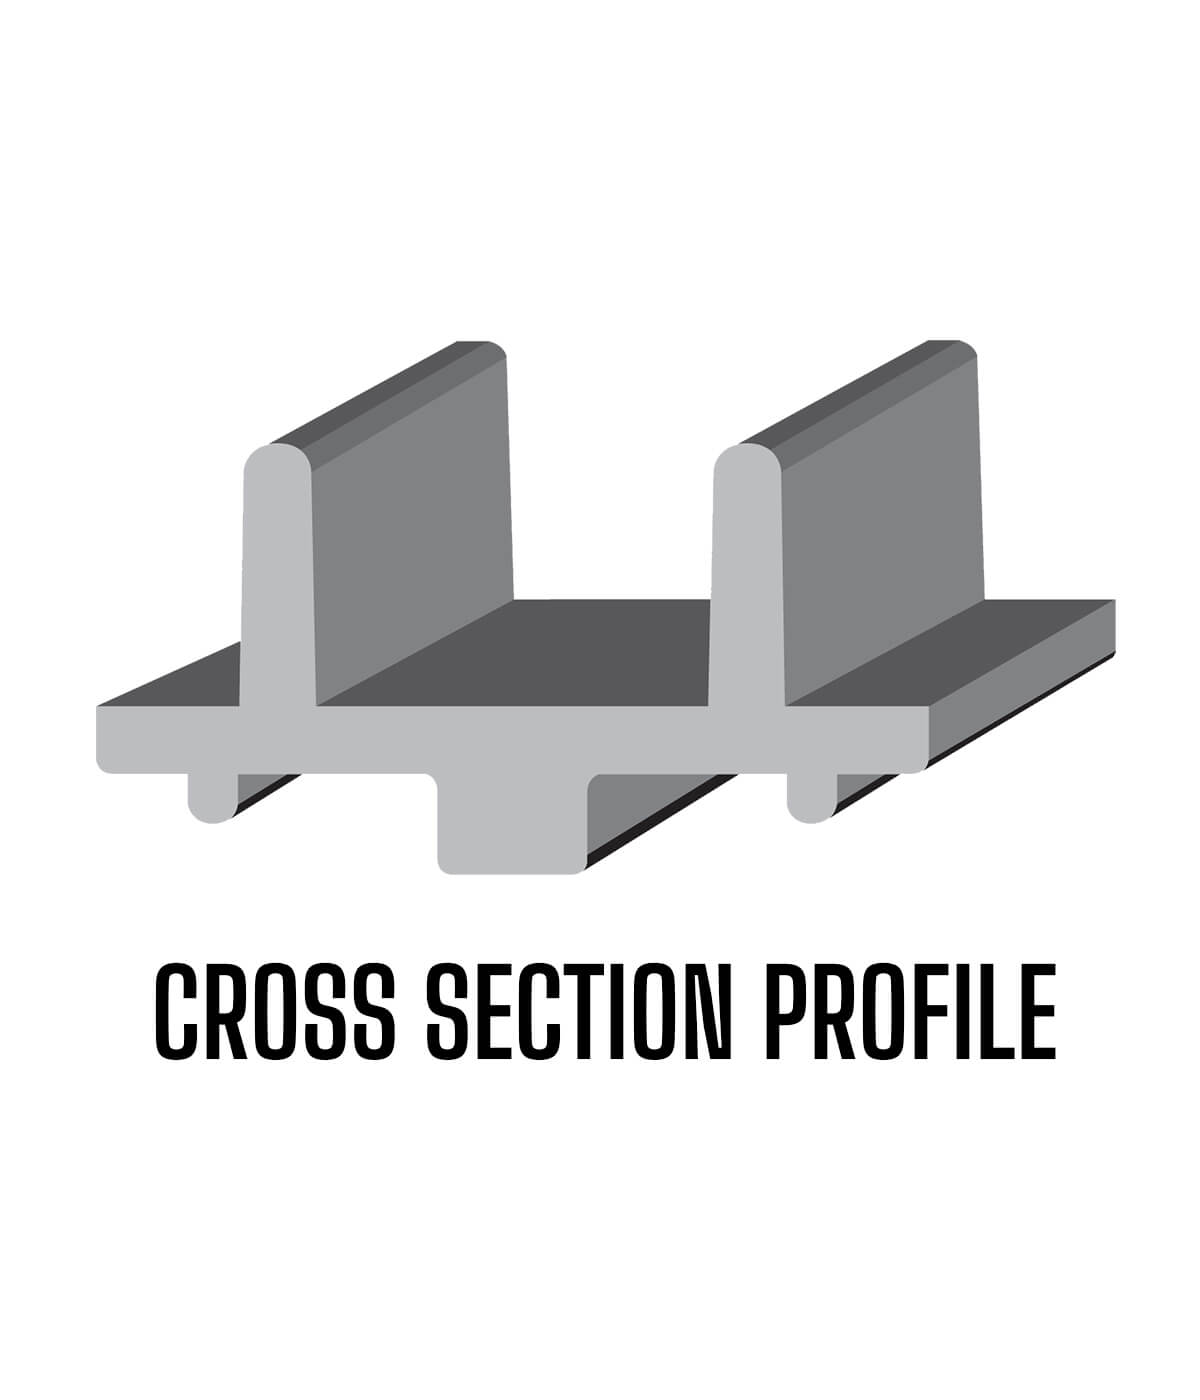 Cross section profile of C&A Pro XPT Skis